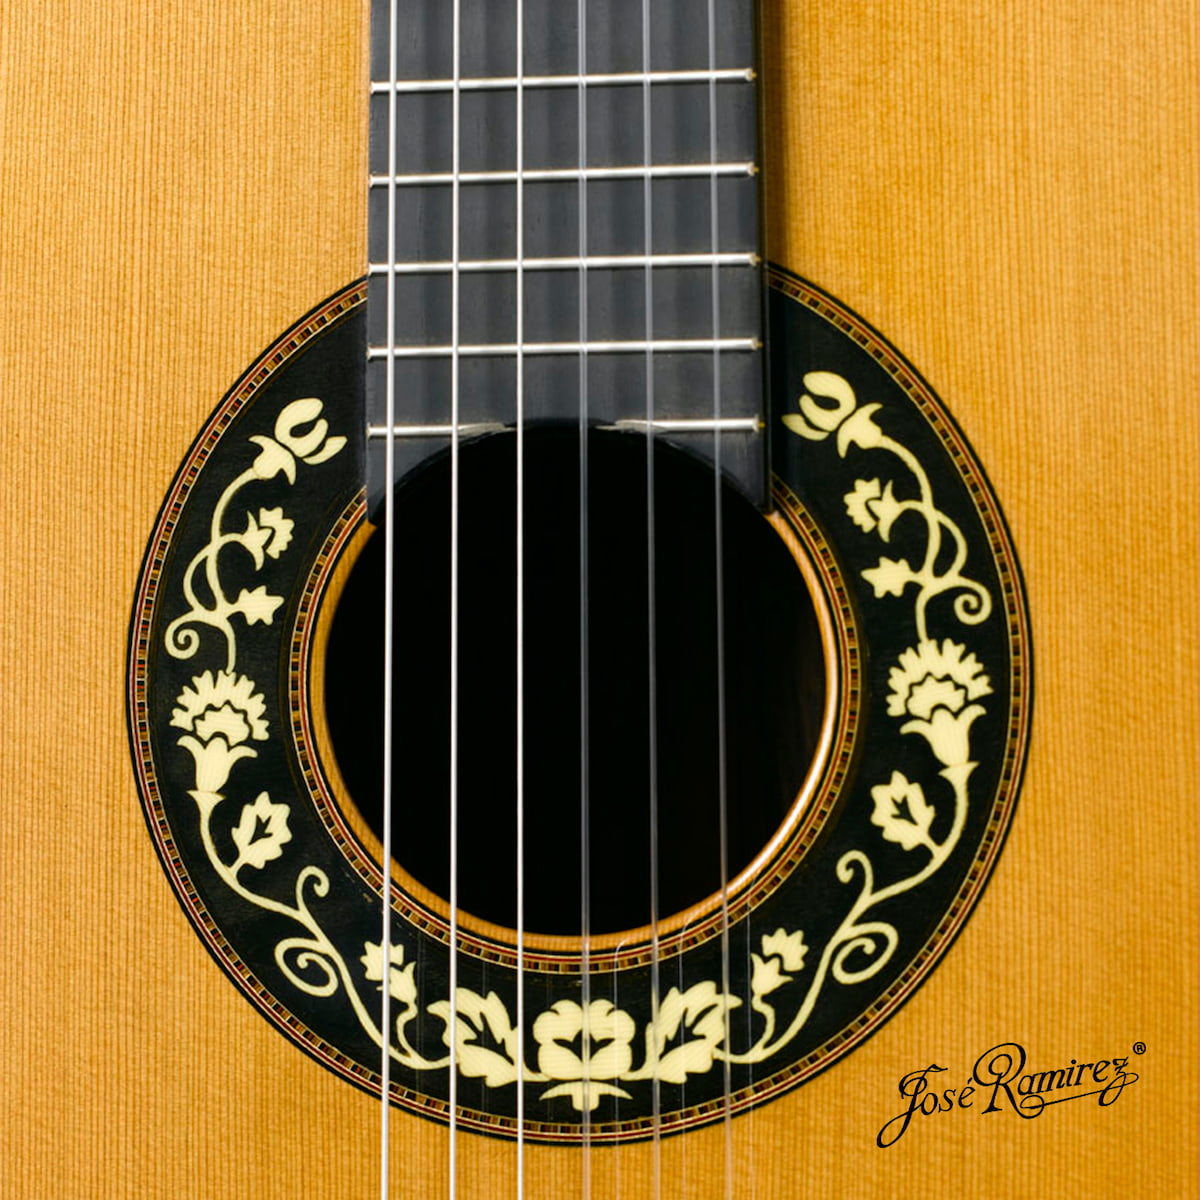 The mouth of the Anniversary guitar of Amalia Ramírez